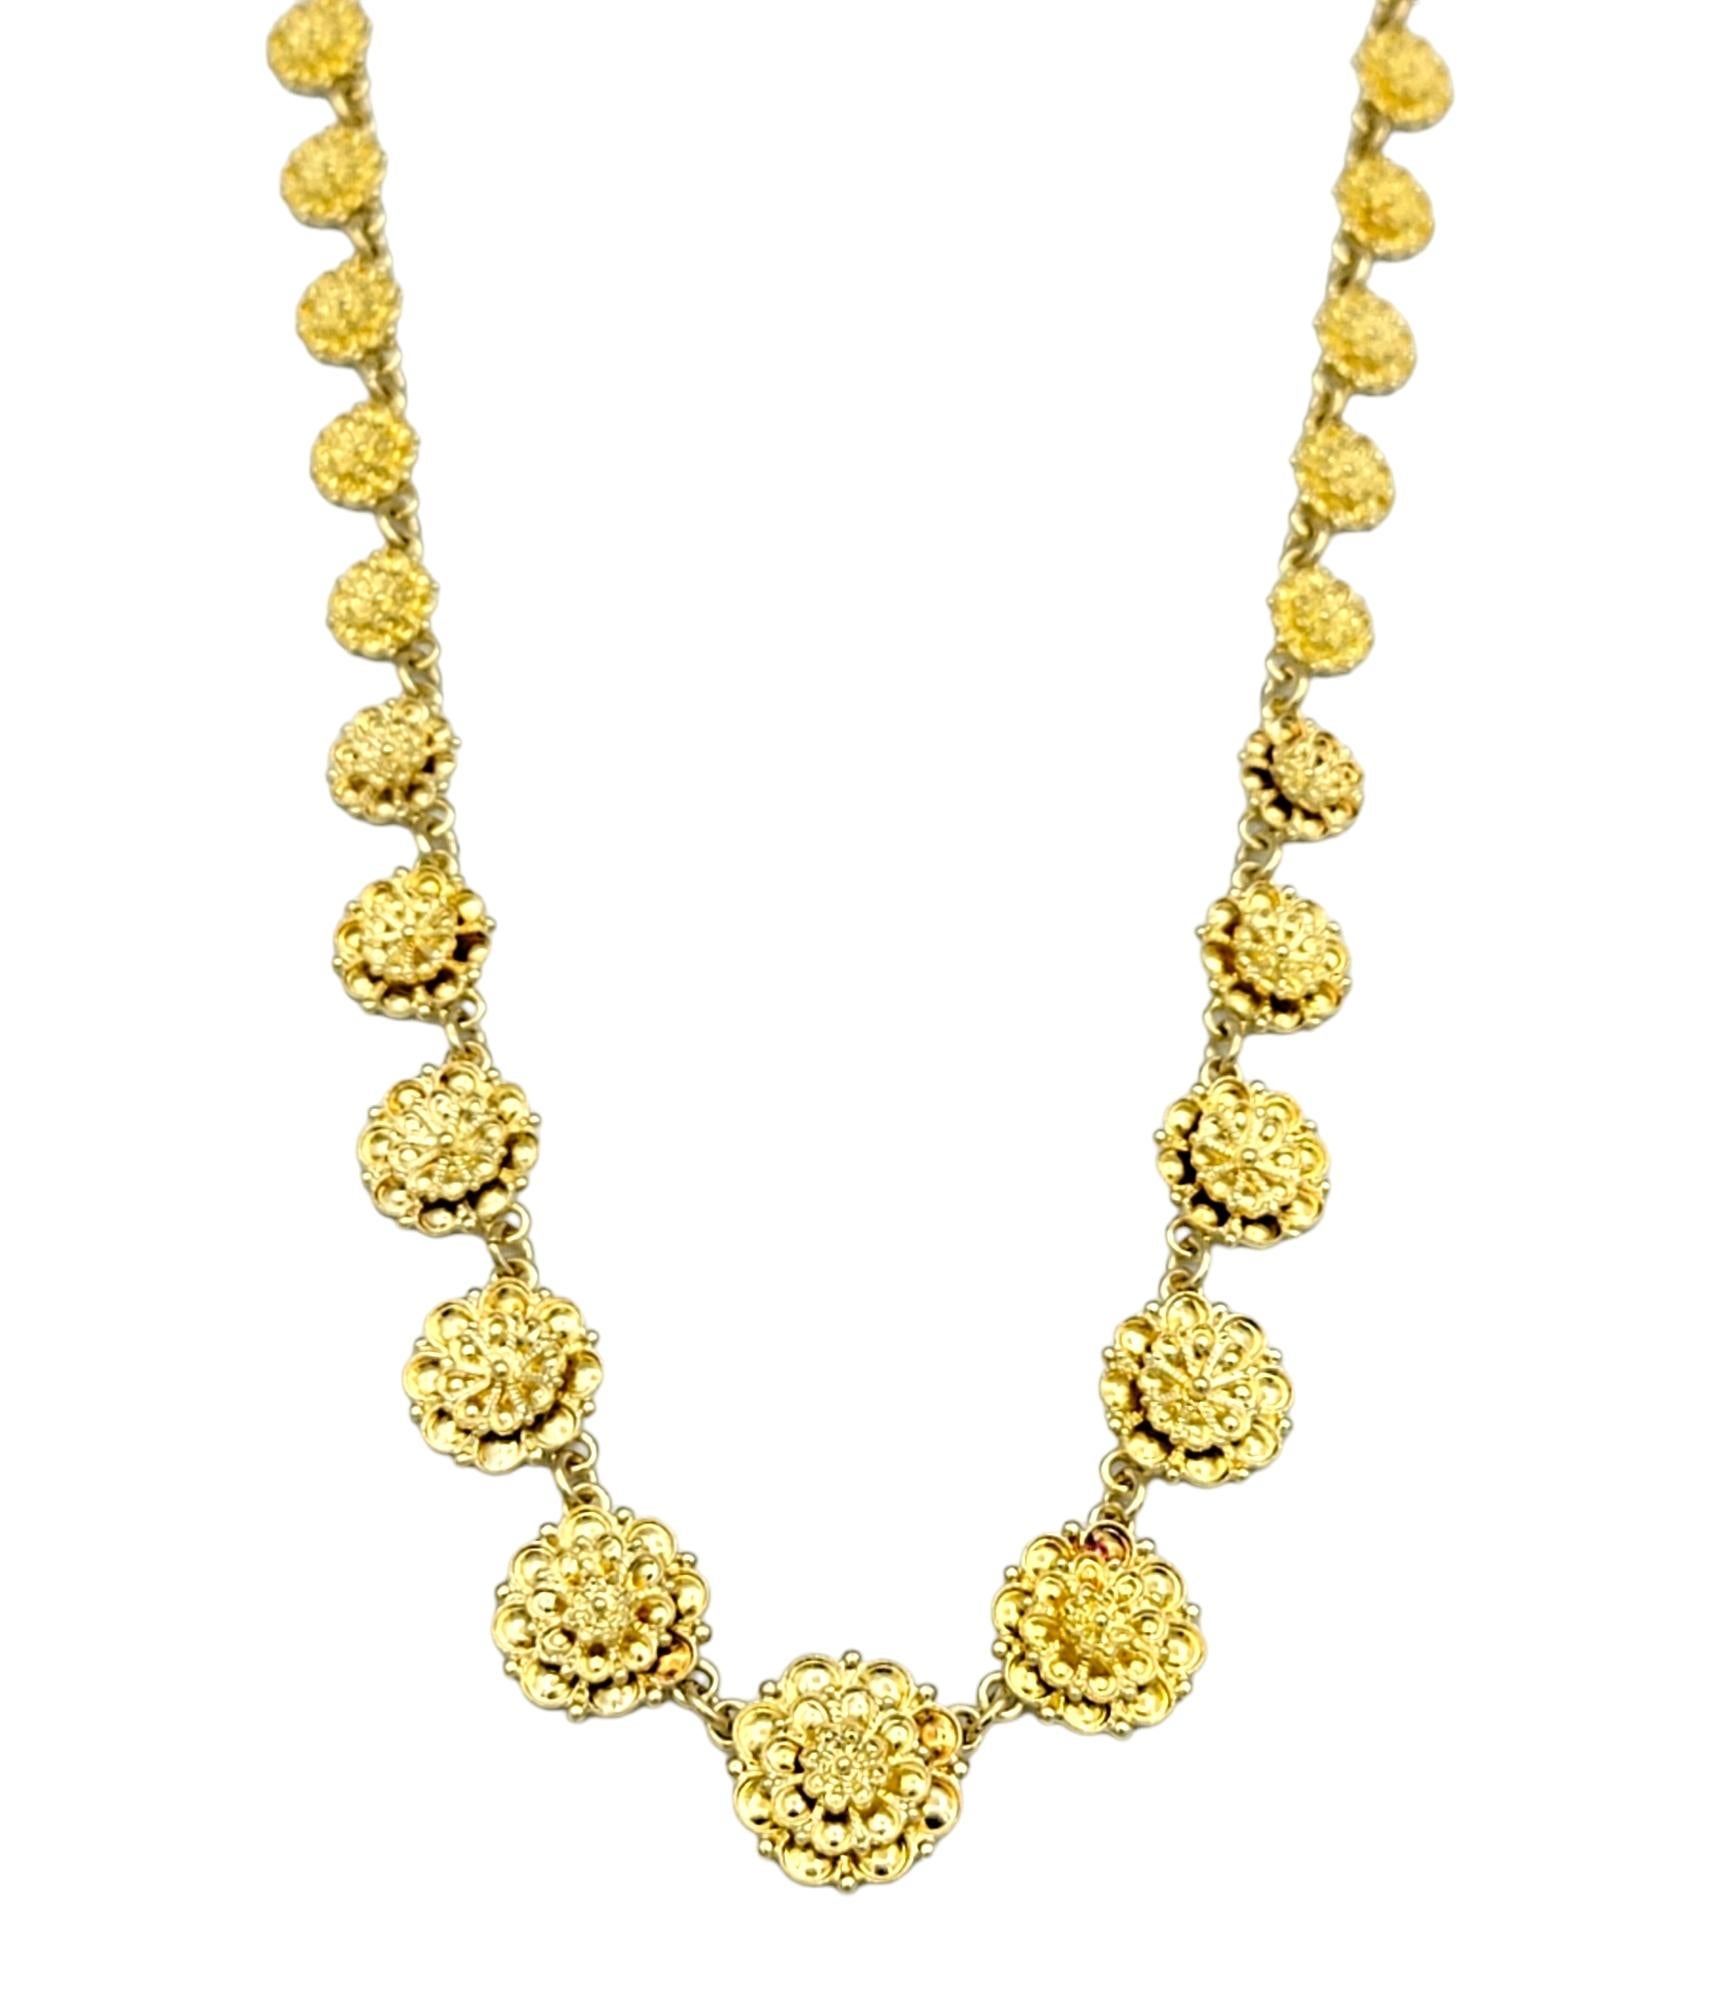 This textured link necklace, crafted in radiant 18 karat yellow gold, is a stunning testament to elegance and refinement. Each link of the necklace features a meticulously detailed flower design, exuding a sense of timeless beauty and femininity.